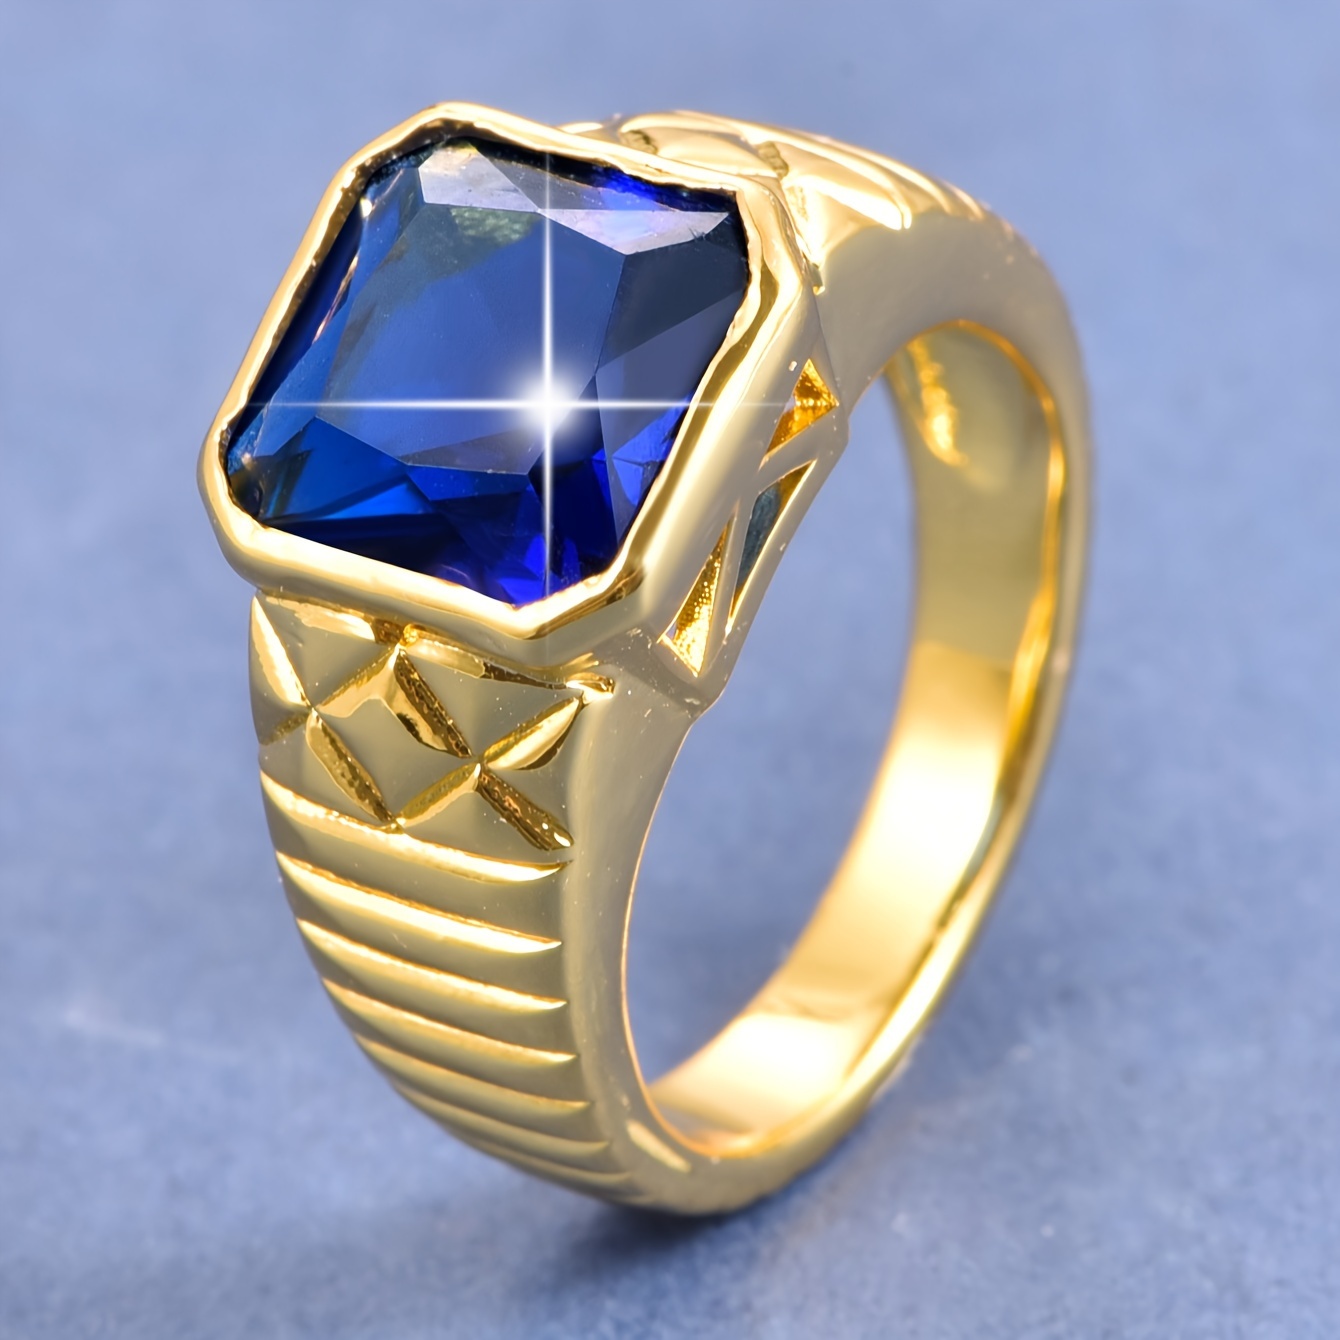 

1pc Blue Square Synthetic Gem Male Ring, S925 Sterling Silver Male Ring, Can Be Applied To Weddings, Birthday Gifts, Valentine's Day, Father's Day, Daily Wear, Parties, Silver Weight 8 Grams